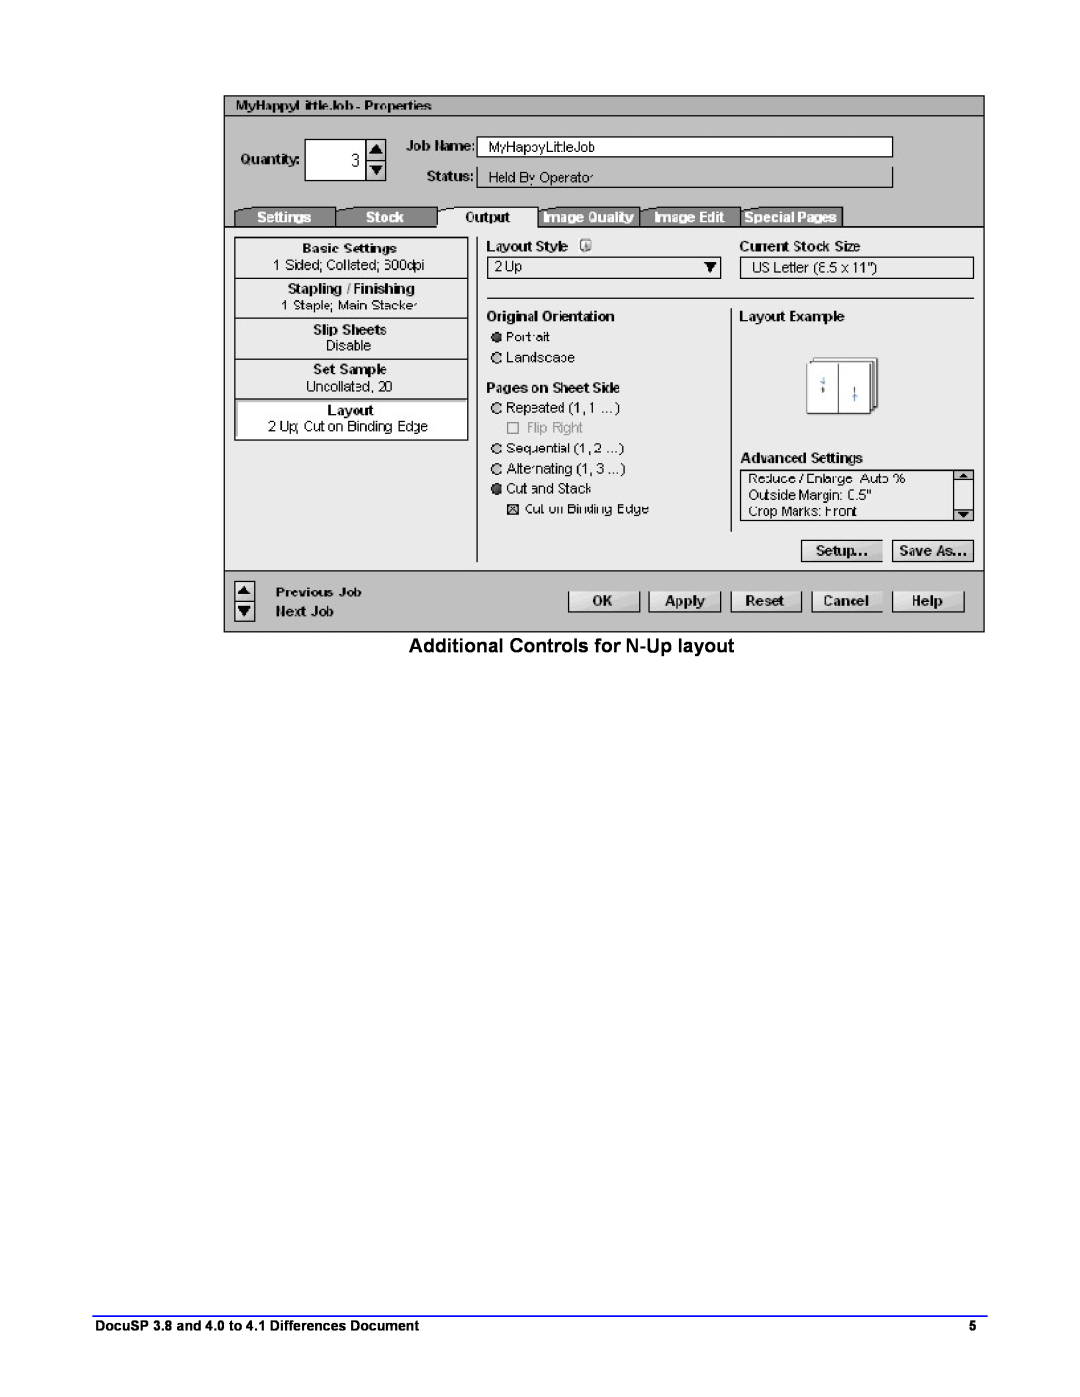 Xerox 4.2 manual Additional Controls for N-Up layout, DocuSP 3.8 and 4.0 to 4.1 Differences Document 